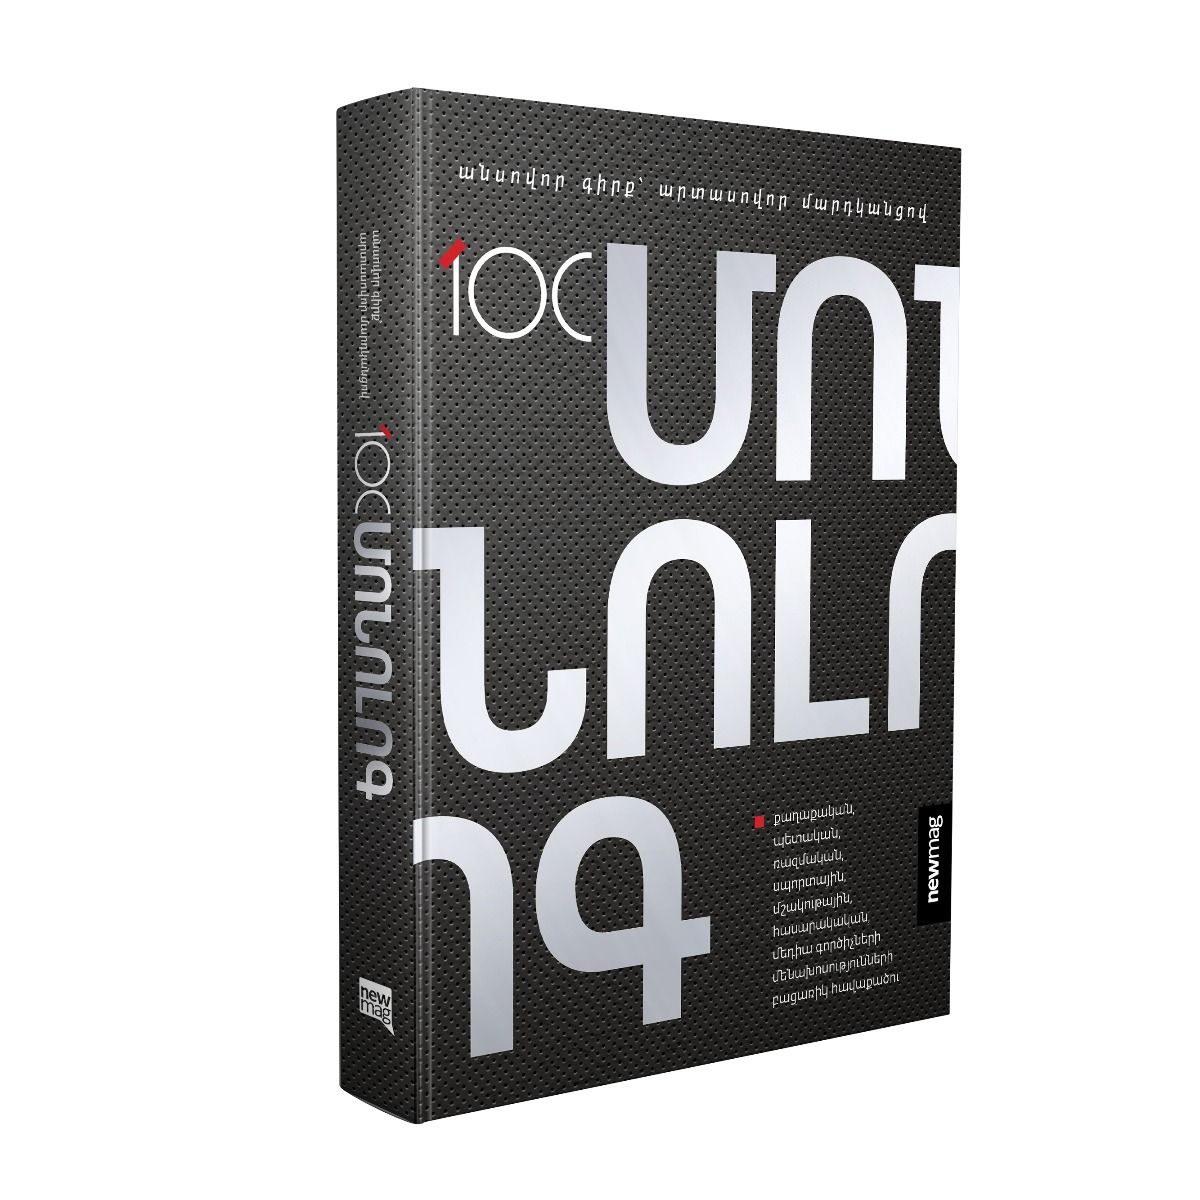 100 Monologues. Unusual Book with Extraordinary People